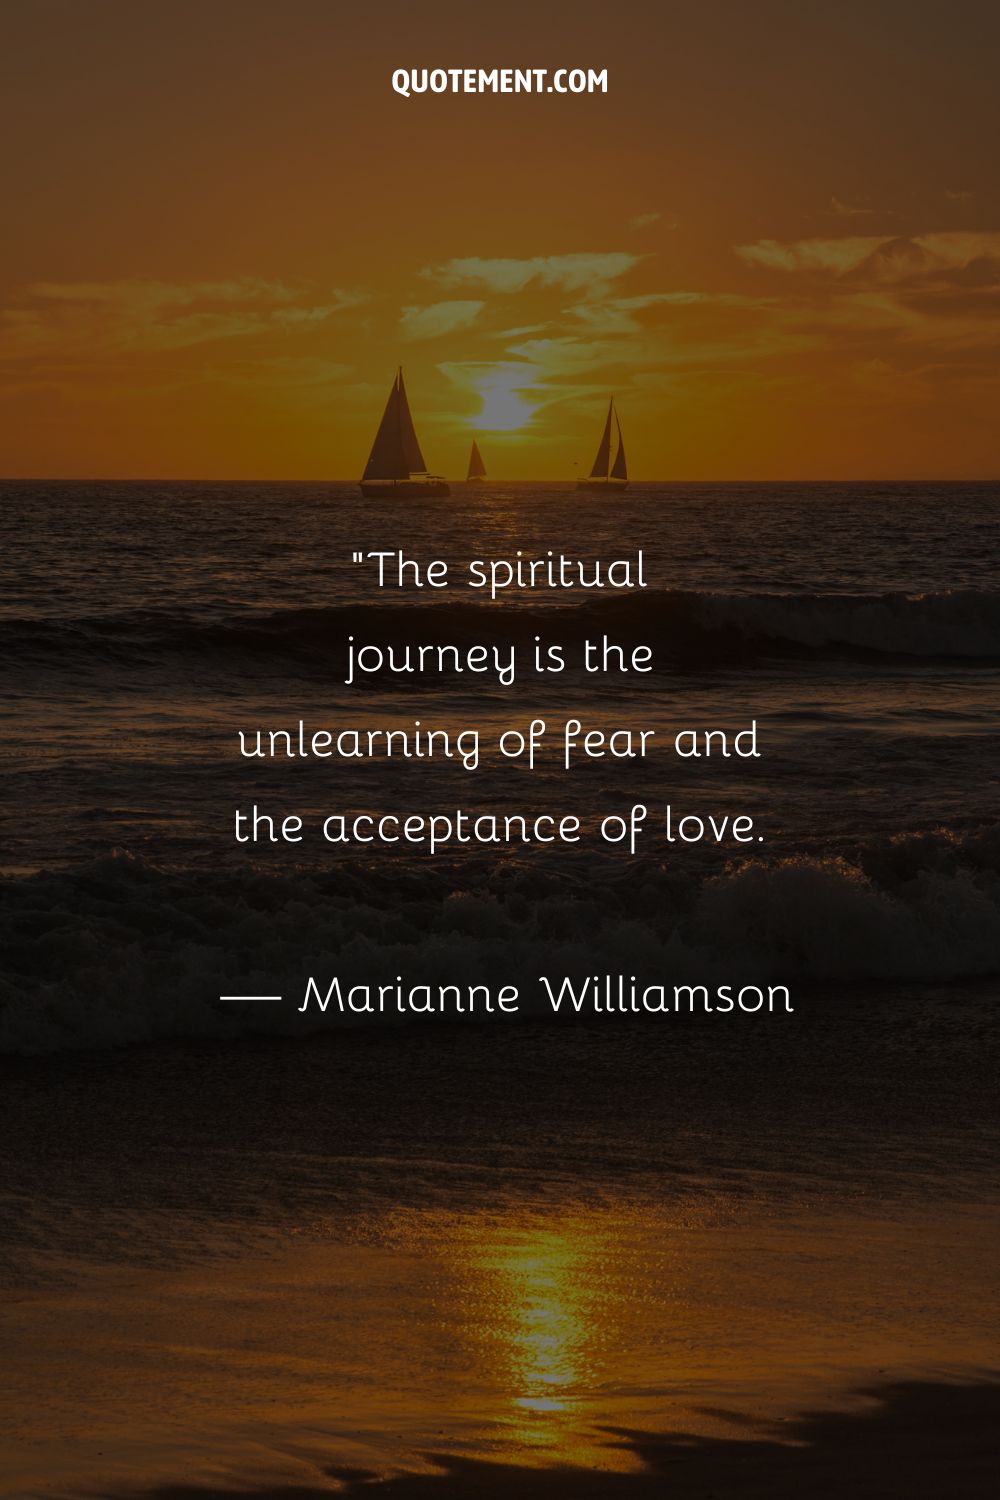 Spirituality quote about fear and love.
